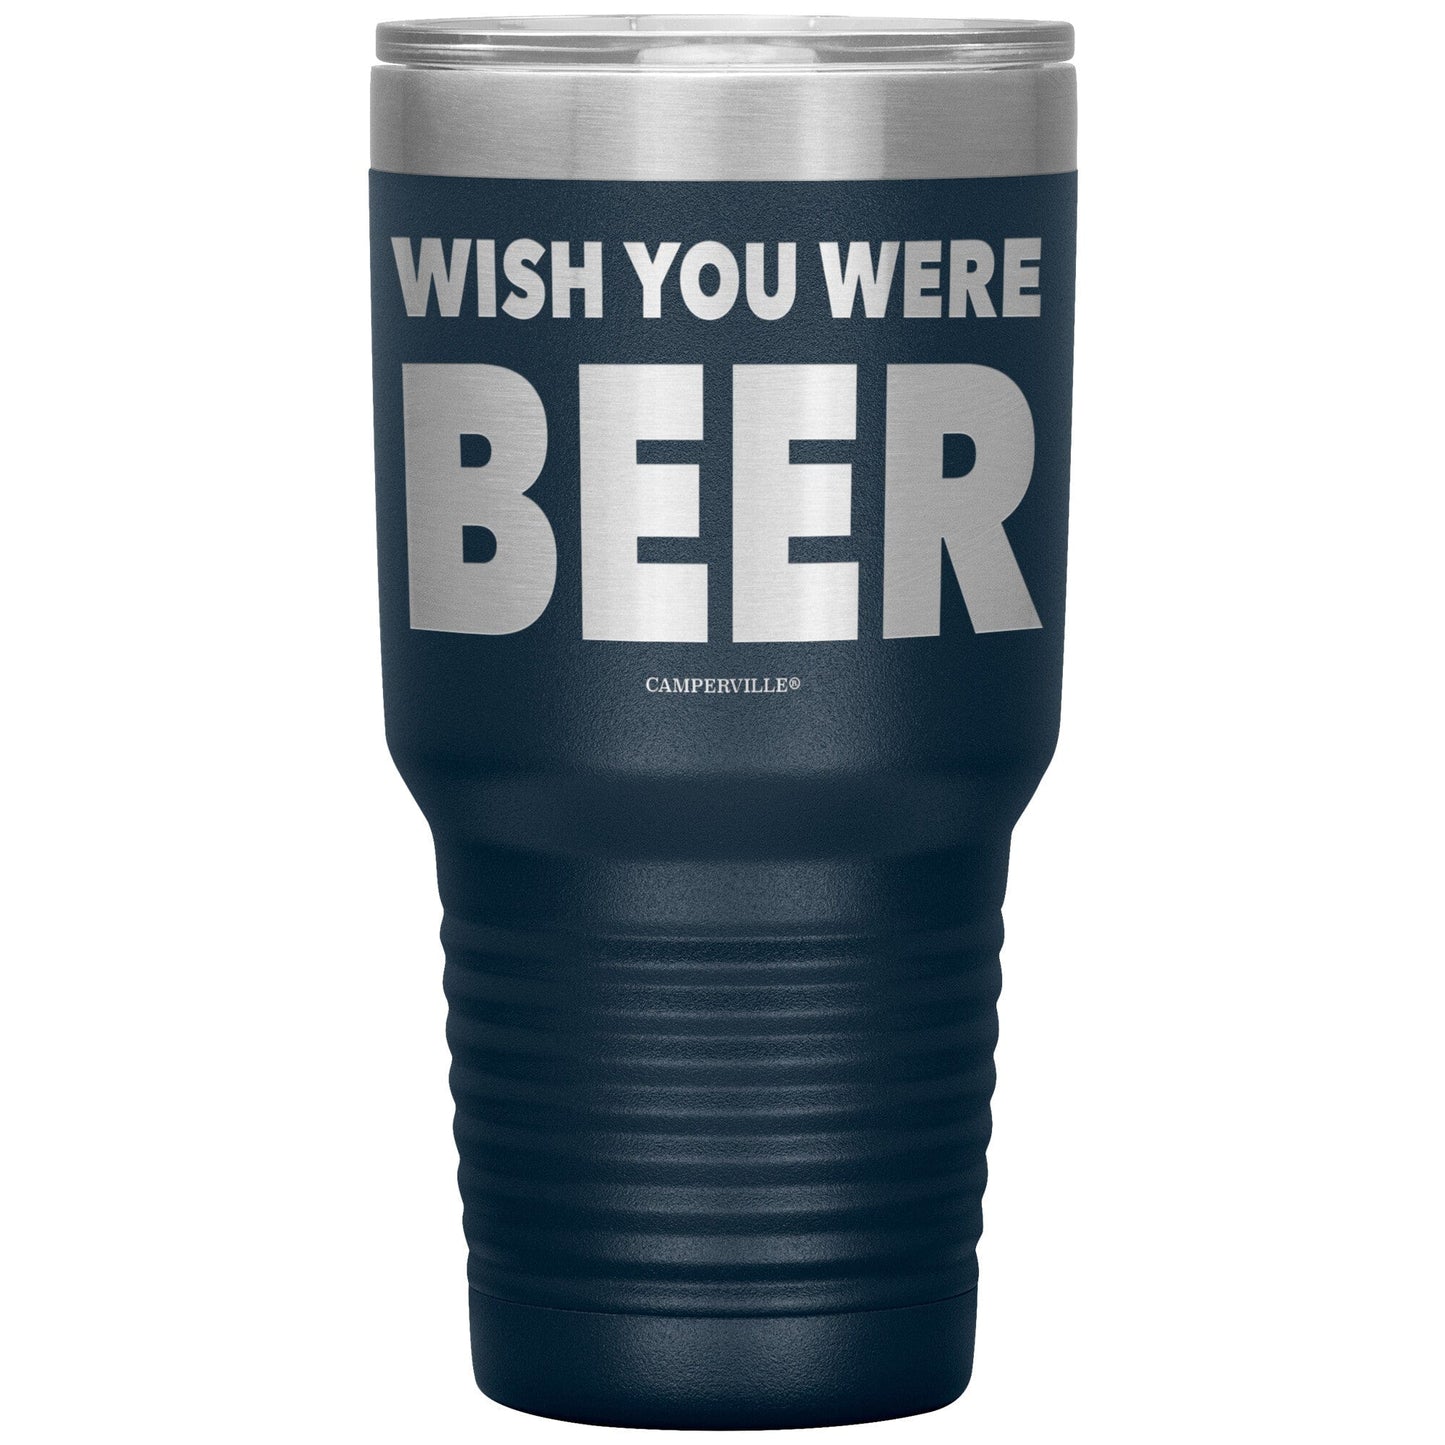 "Wish You Were Beer" - Stainless Steel Tumbler